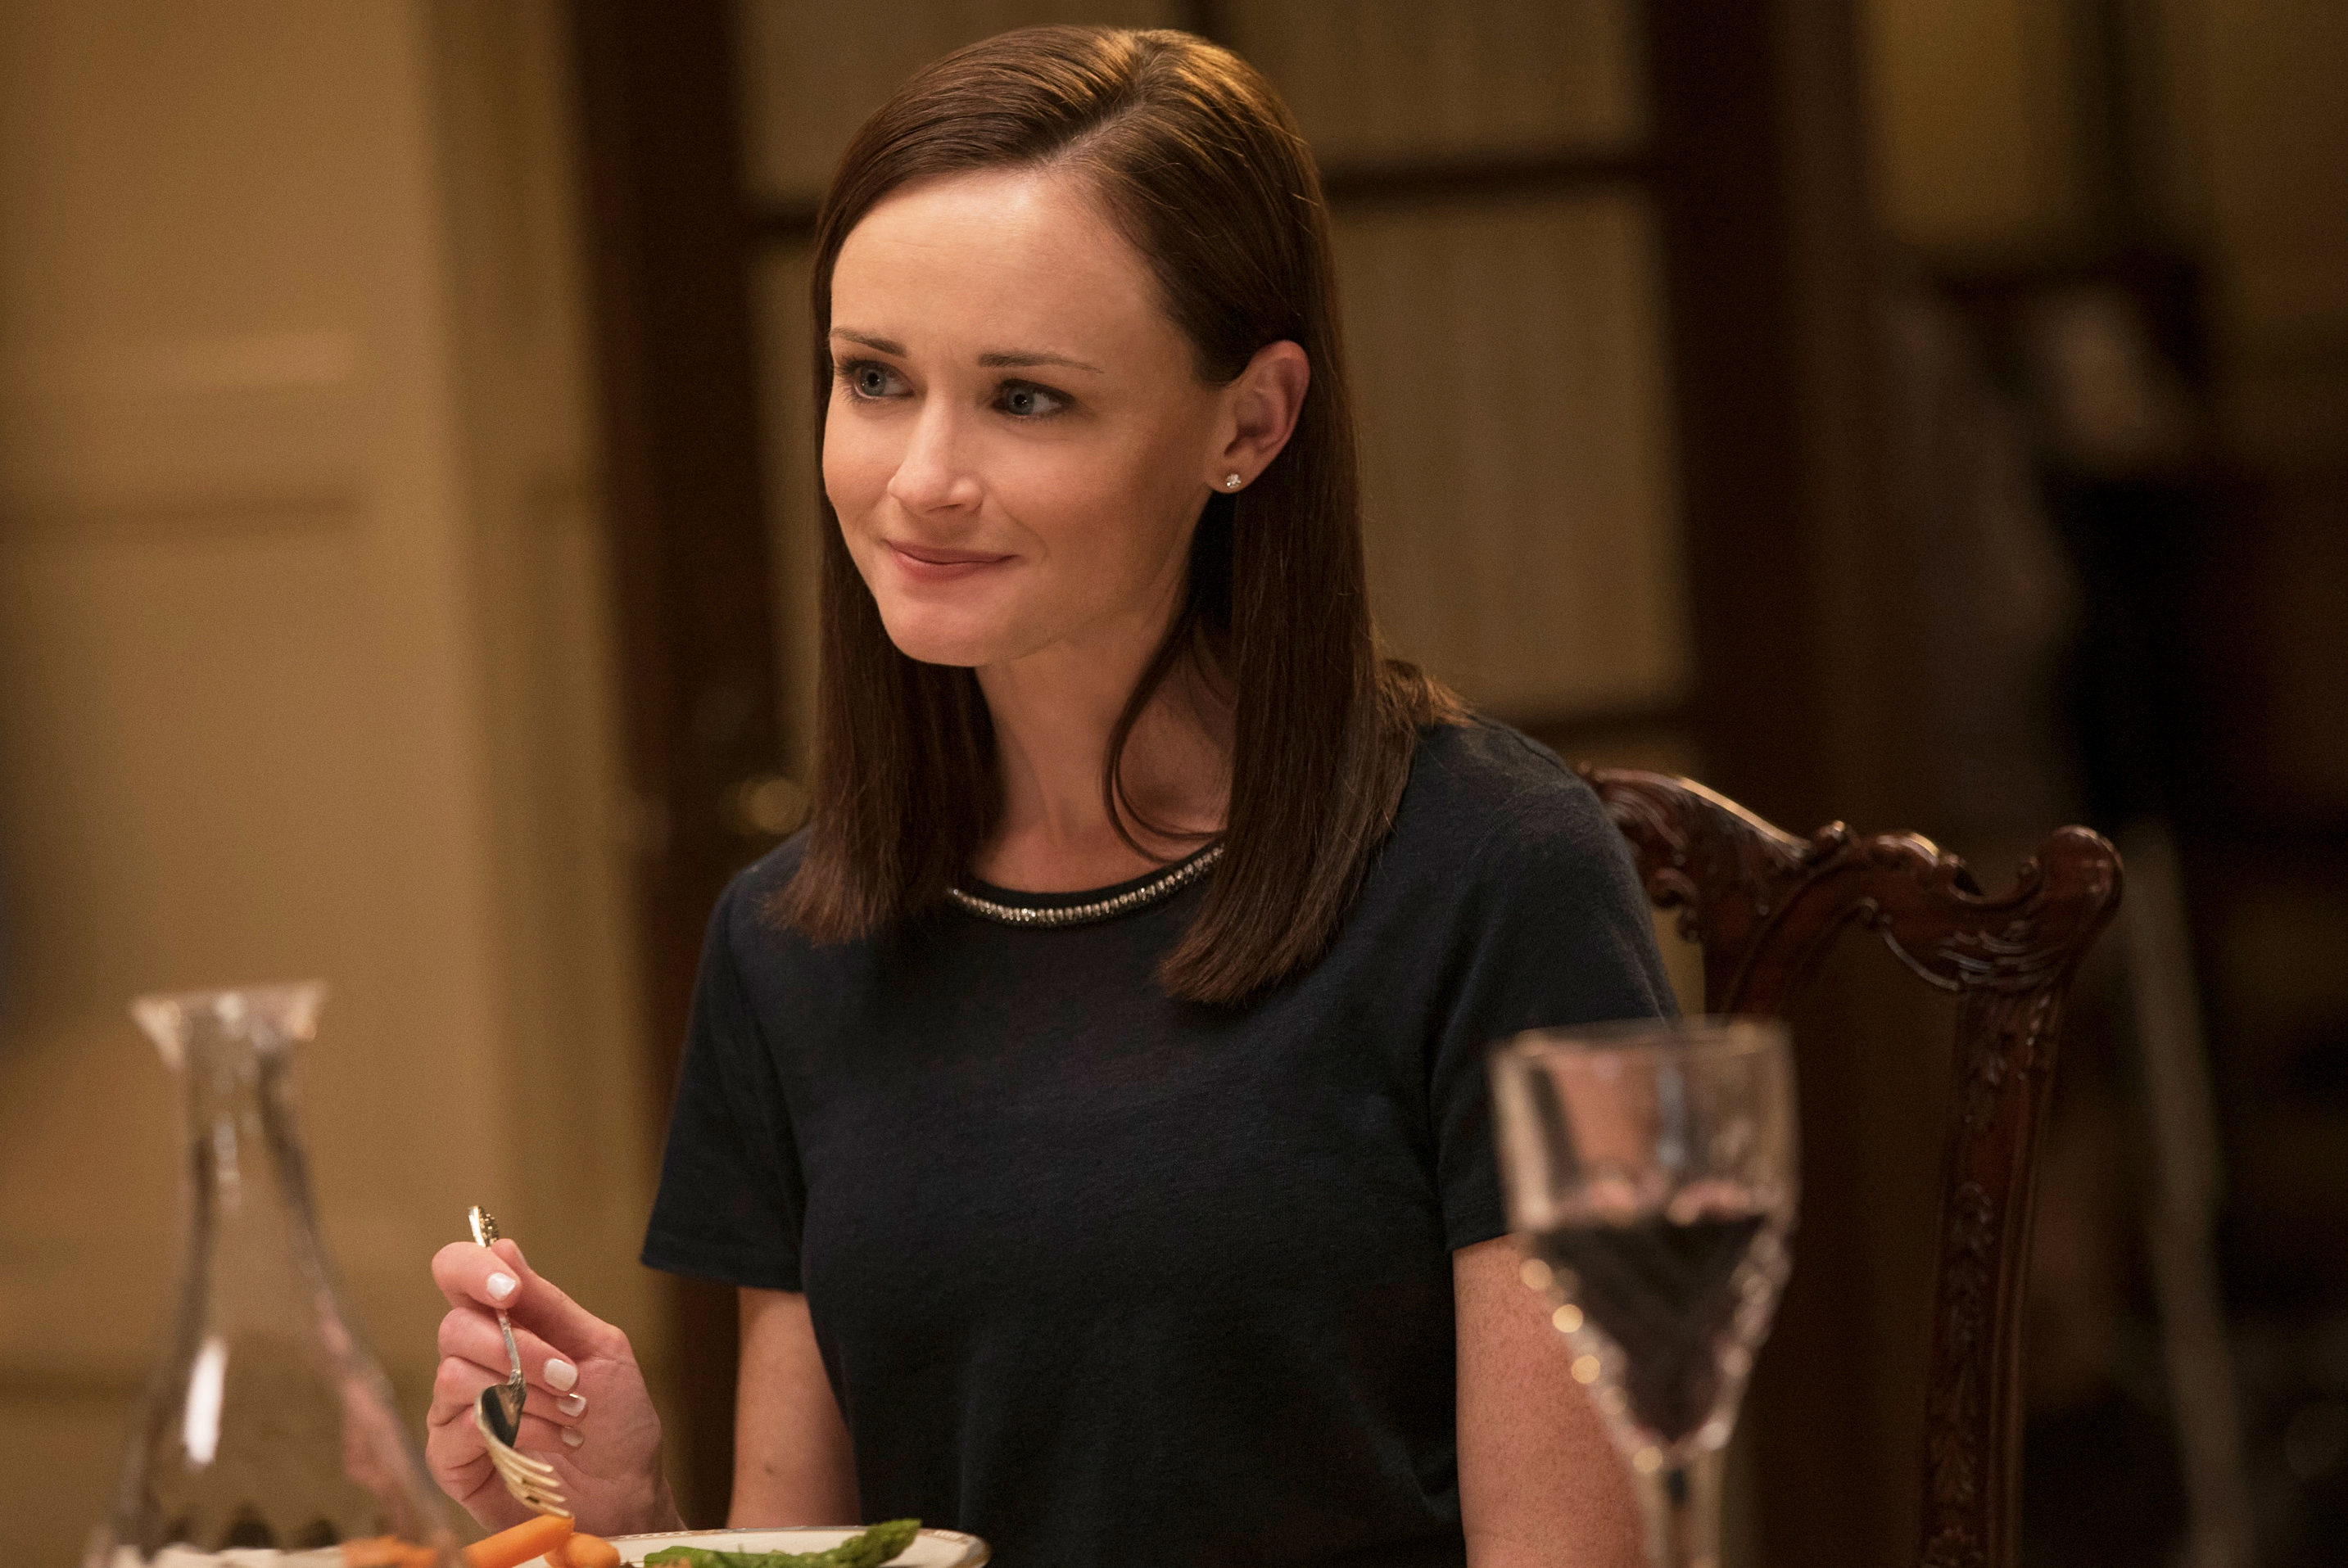 A woman seated at a dining table with a subtle smile, in a casual setting for a TV show scene